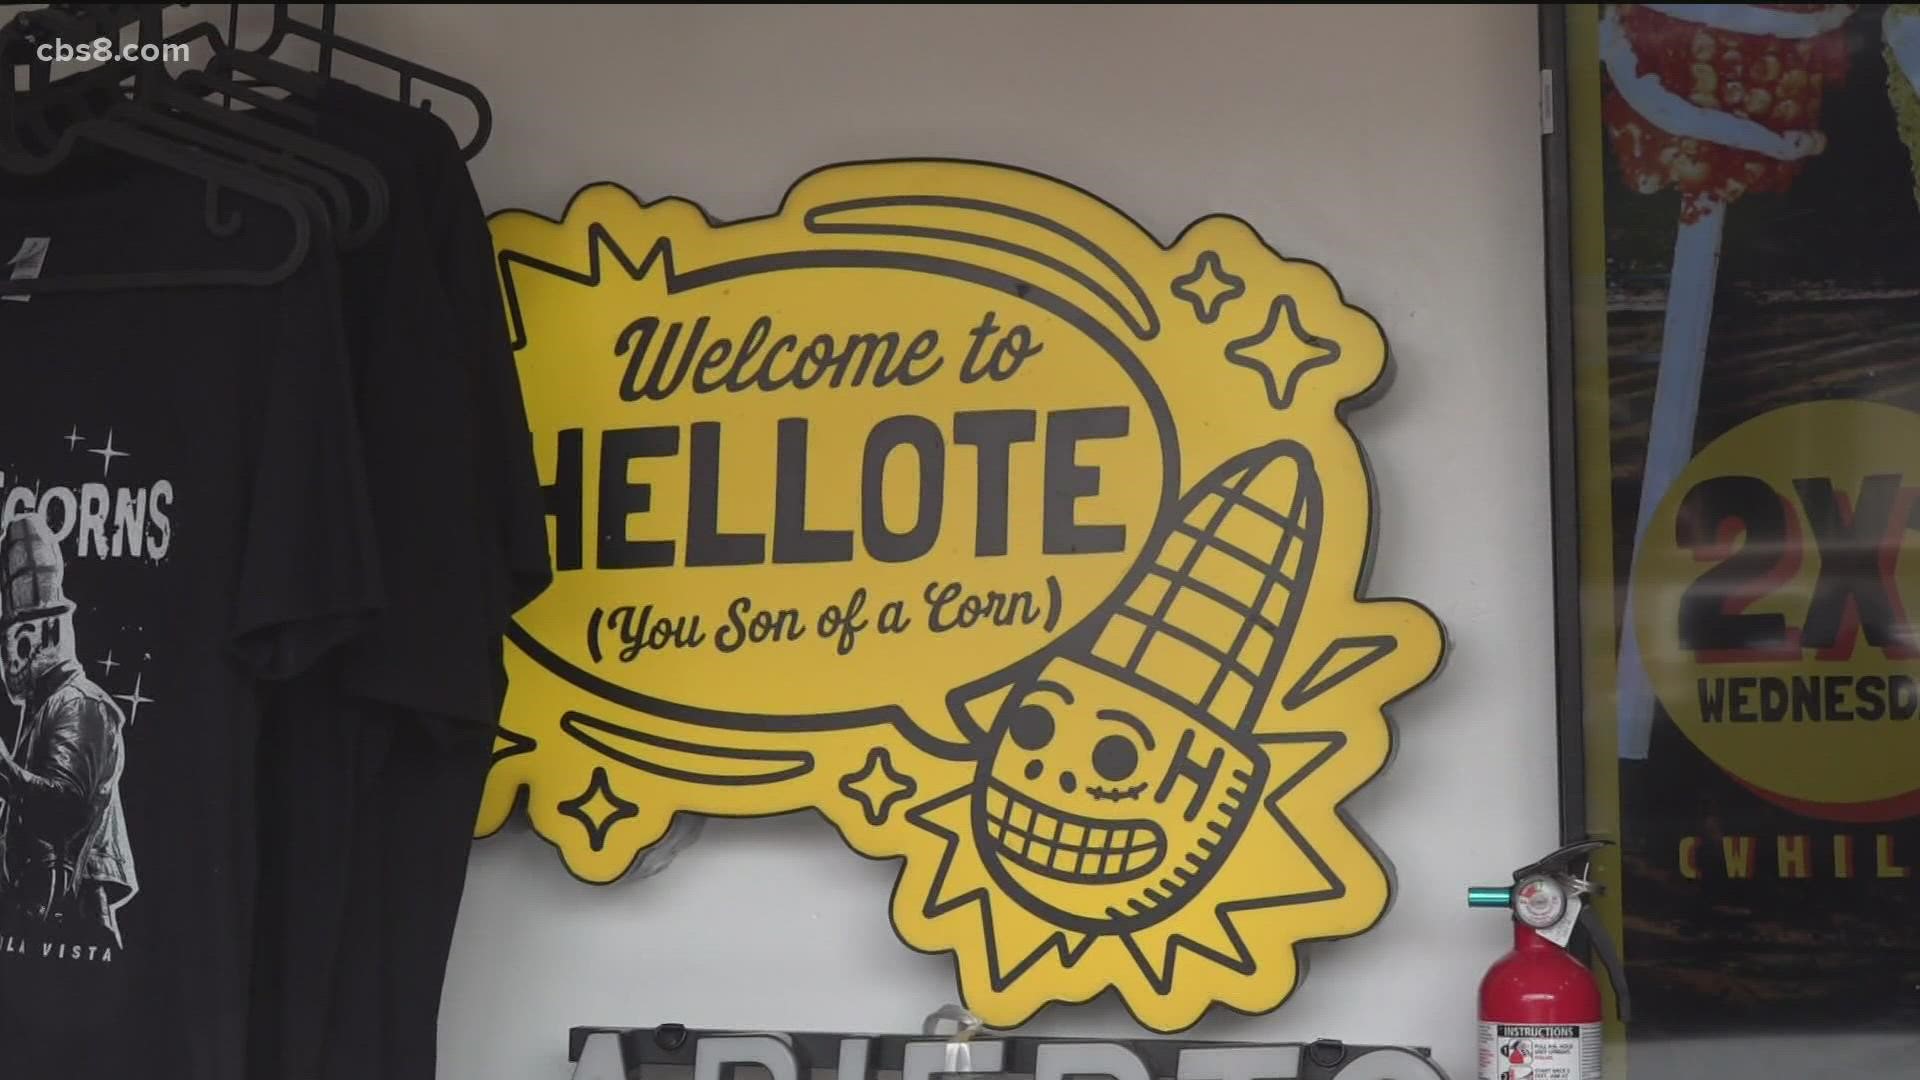 Hellote is the combination of the word "hello" and "elote" which means corn. They're located in Chula Vista and sell different types of Mexican street corn.